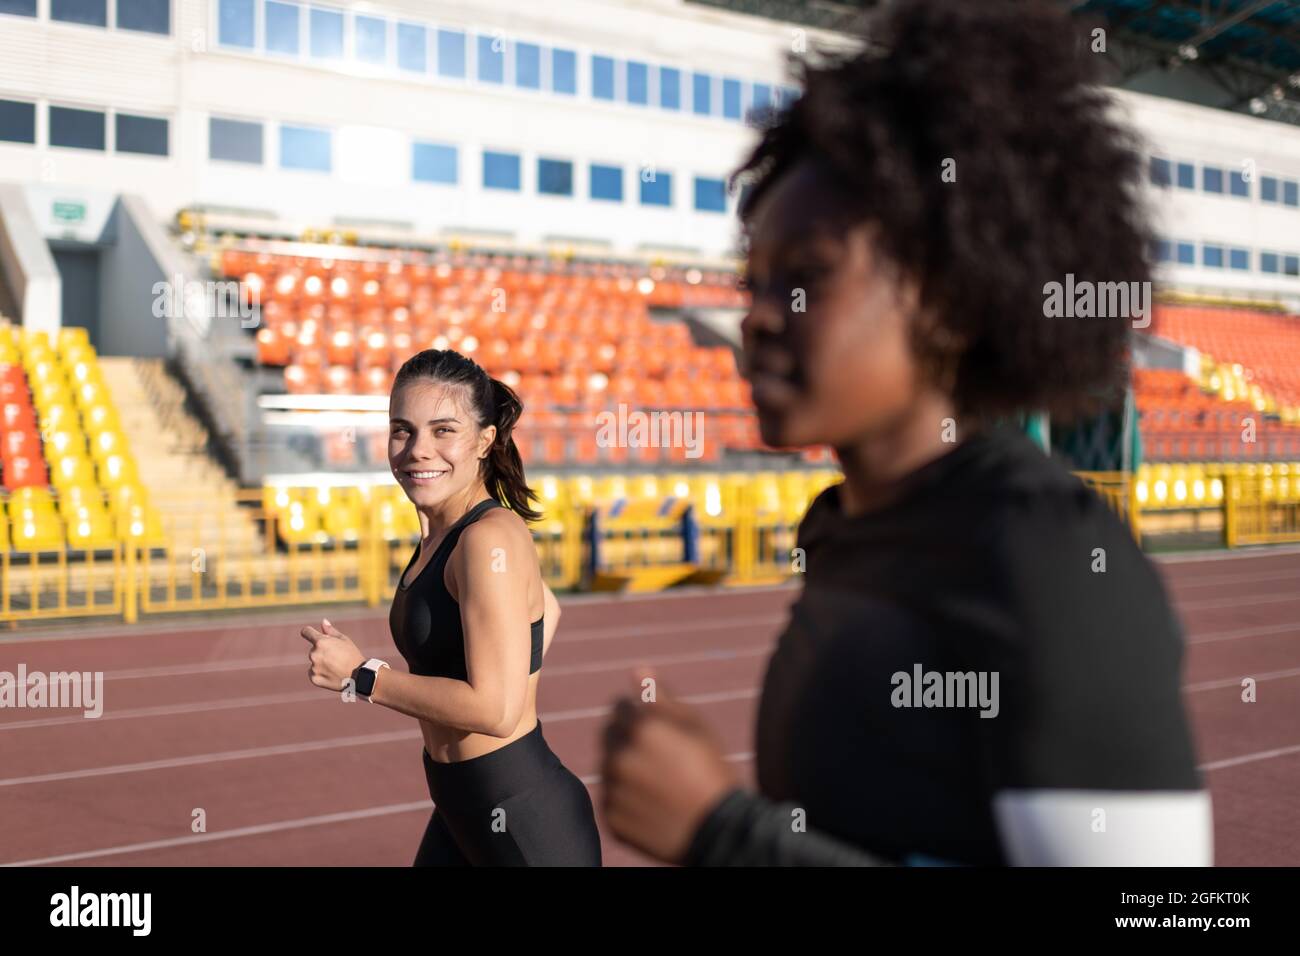 Positive athlete looking at black girlfriend while running on track together Stock Photo